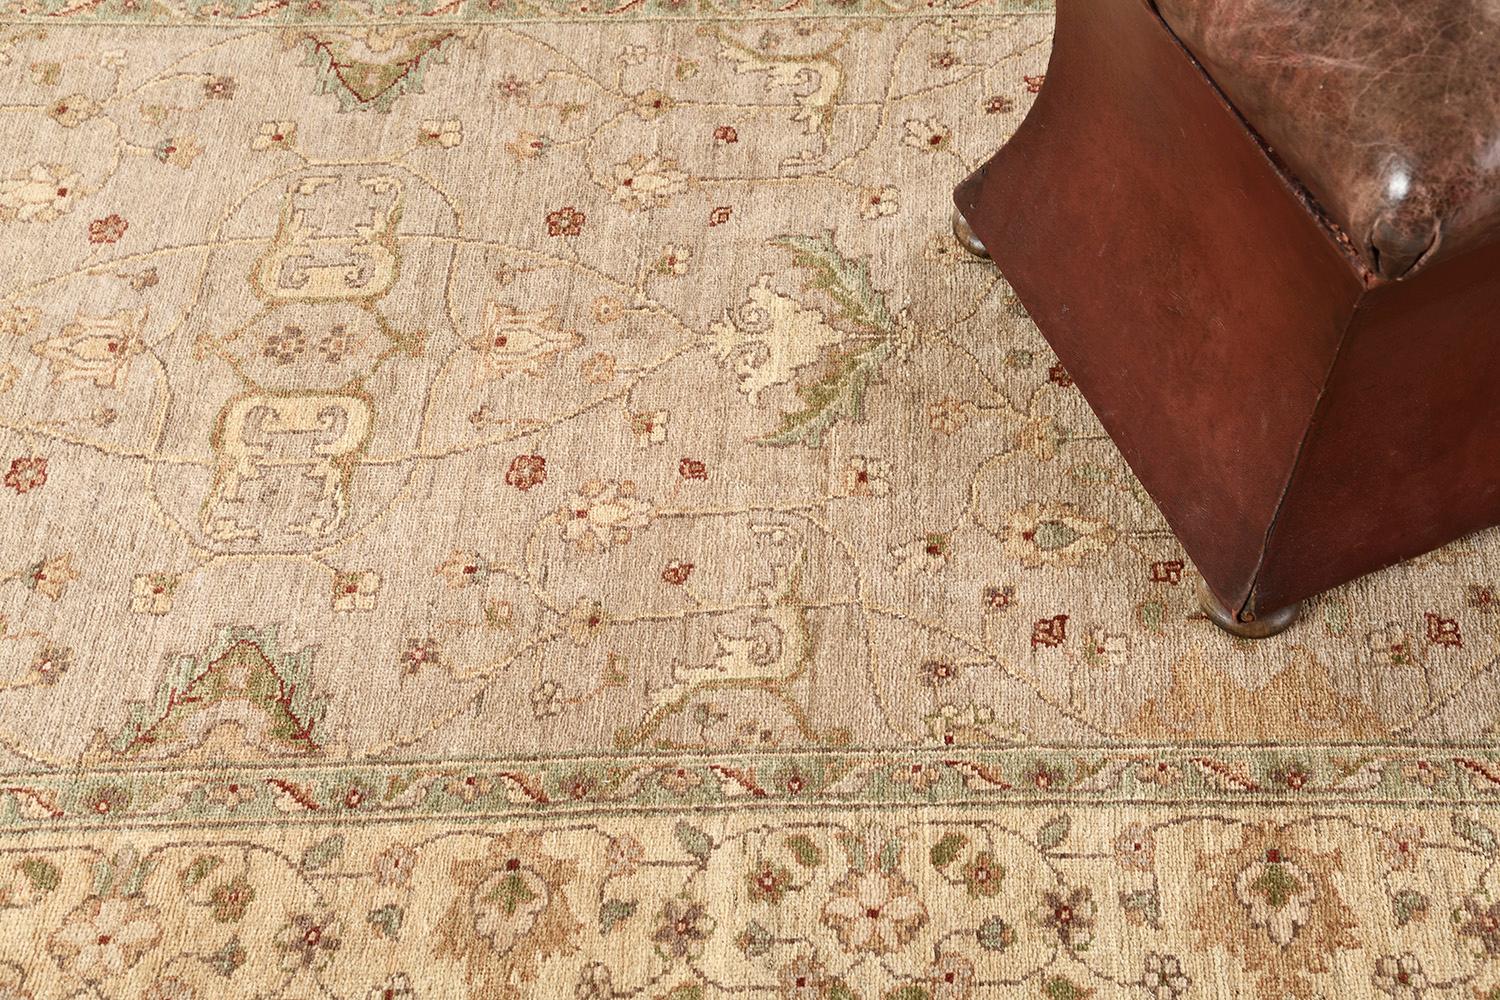 Series of florid ornaments are reflected through neutral-toned embellishments to blooming and dazzling brownfields. The borders are beautifully hand-woven that created from a vegetable dye to form an elegant Sultanabad Rug. Truly a Divine creation